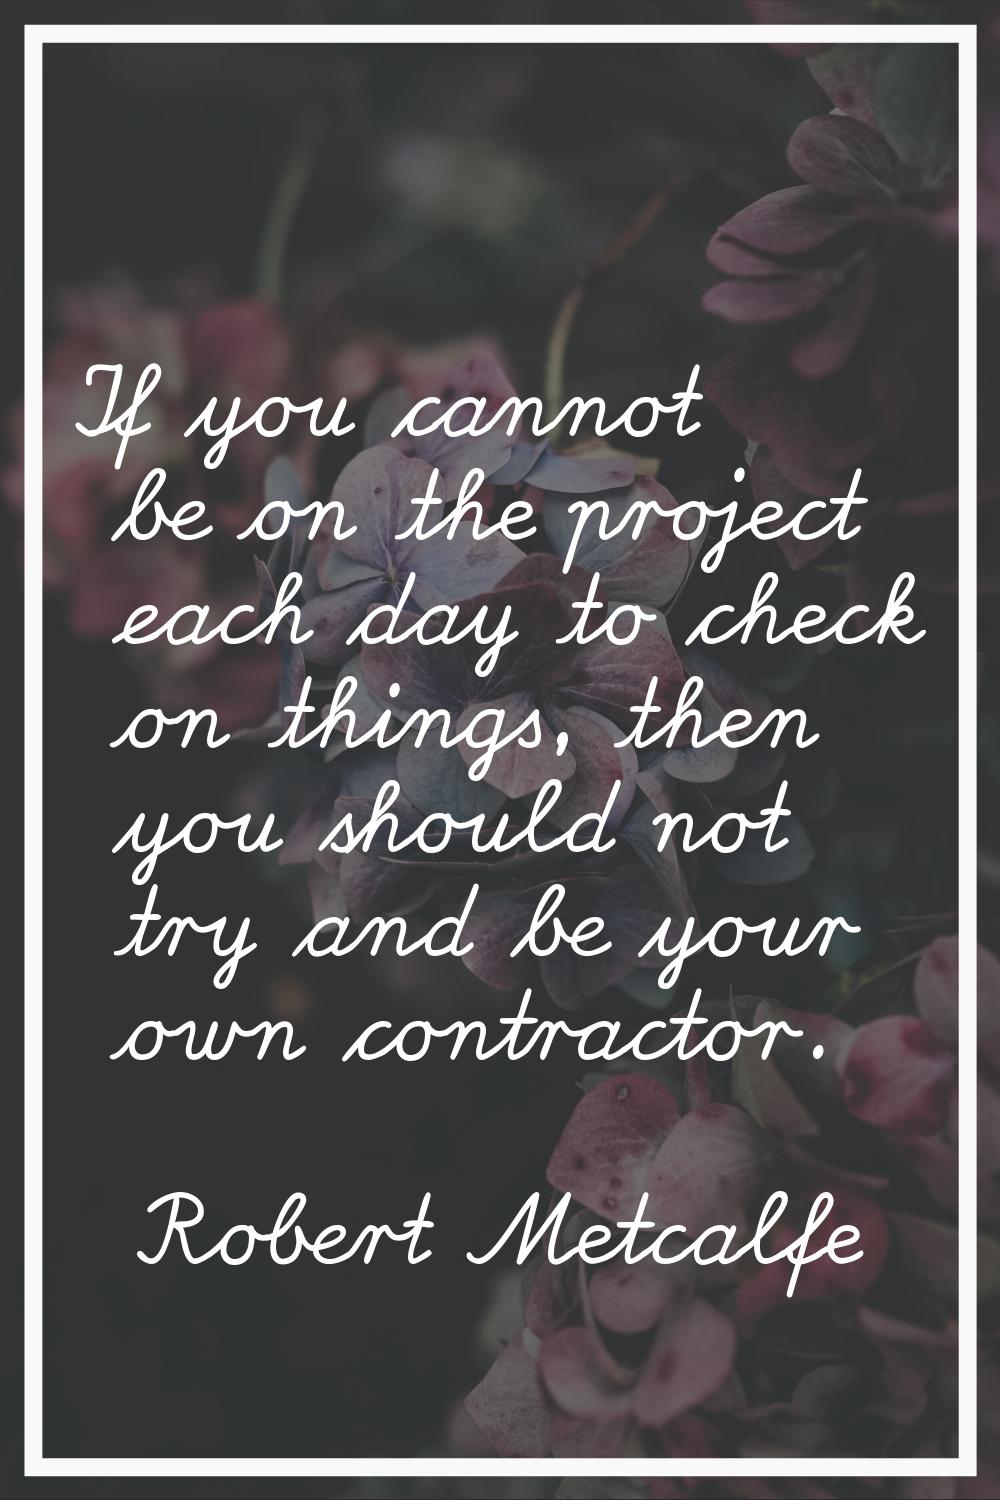 If you cannot be on the project each day to check on things, then you should not try and be your ow